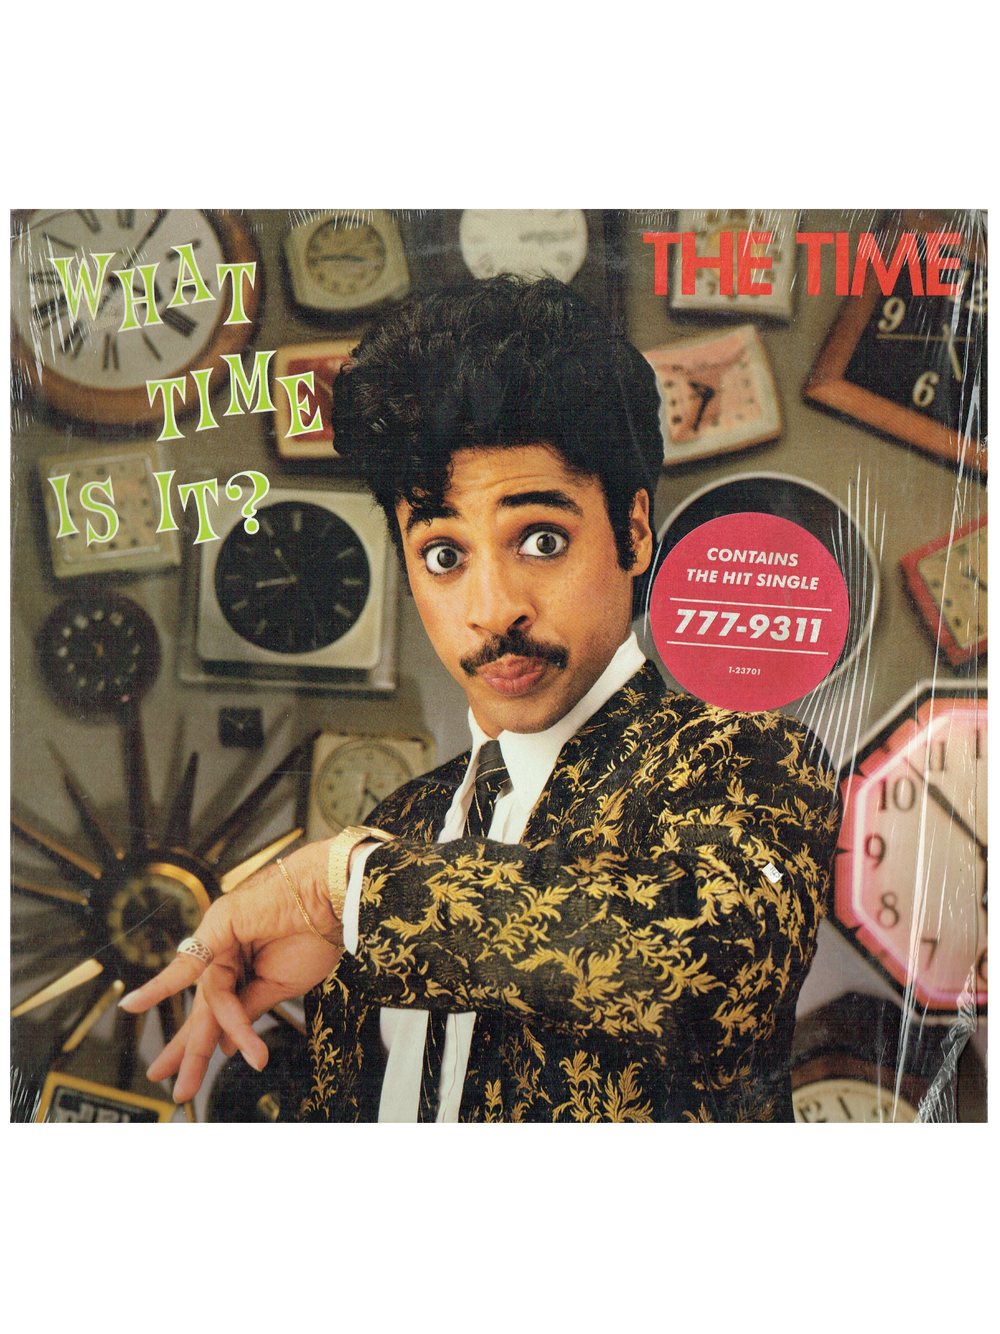 The Time What Time Is It? USA Vinyl Album Original Release 1982 Prince WITH HYPE